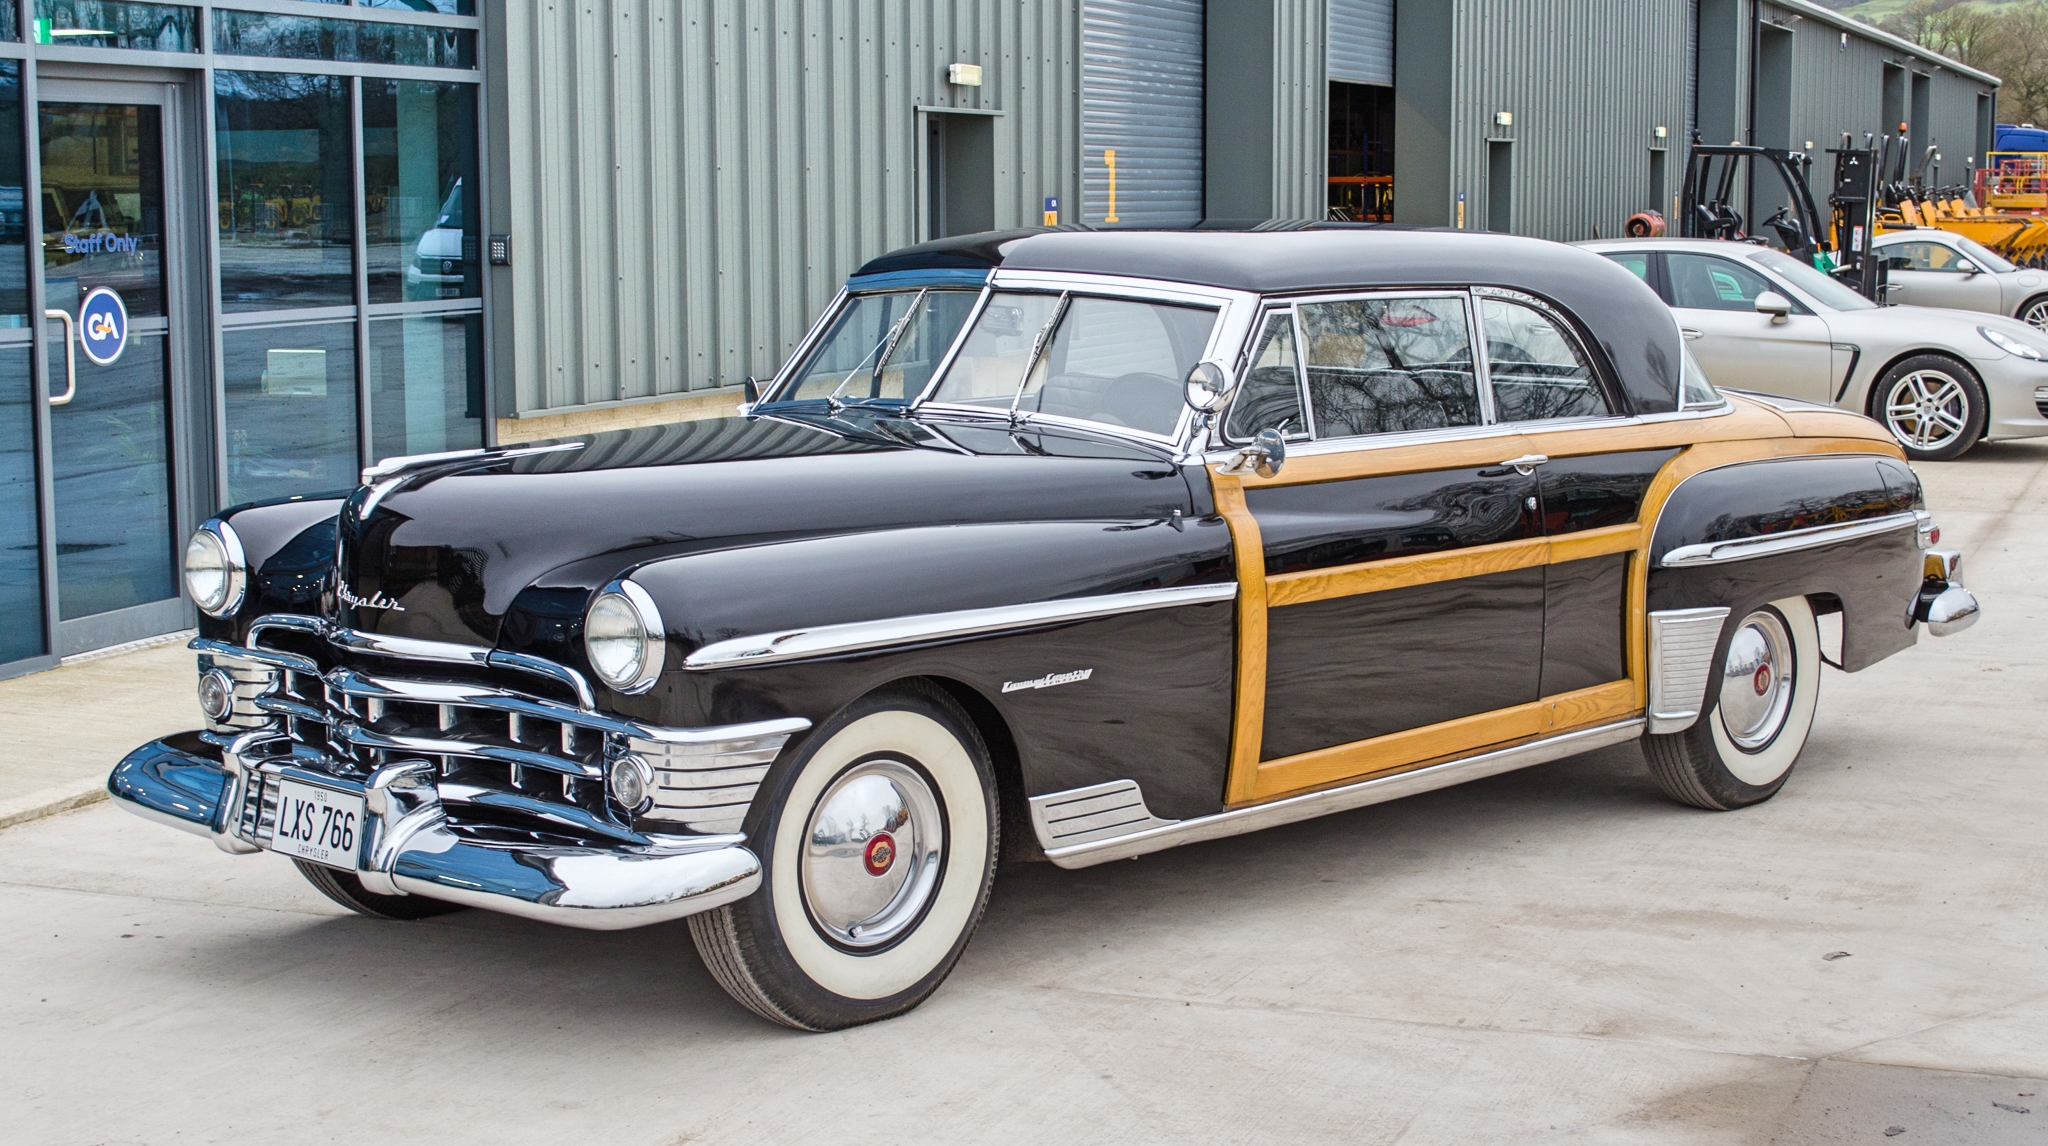 1950 Chrysler Newport Town and Country 5300cc 2 door Coupe - Image 4 of 62